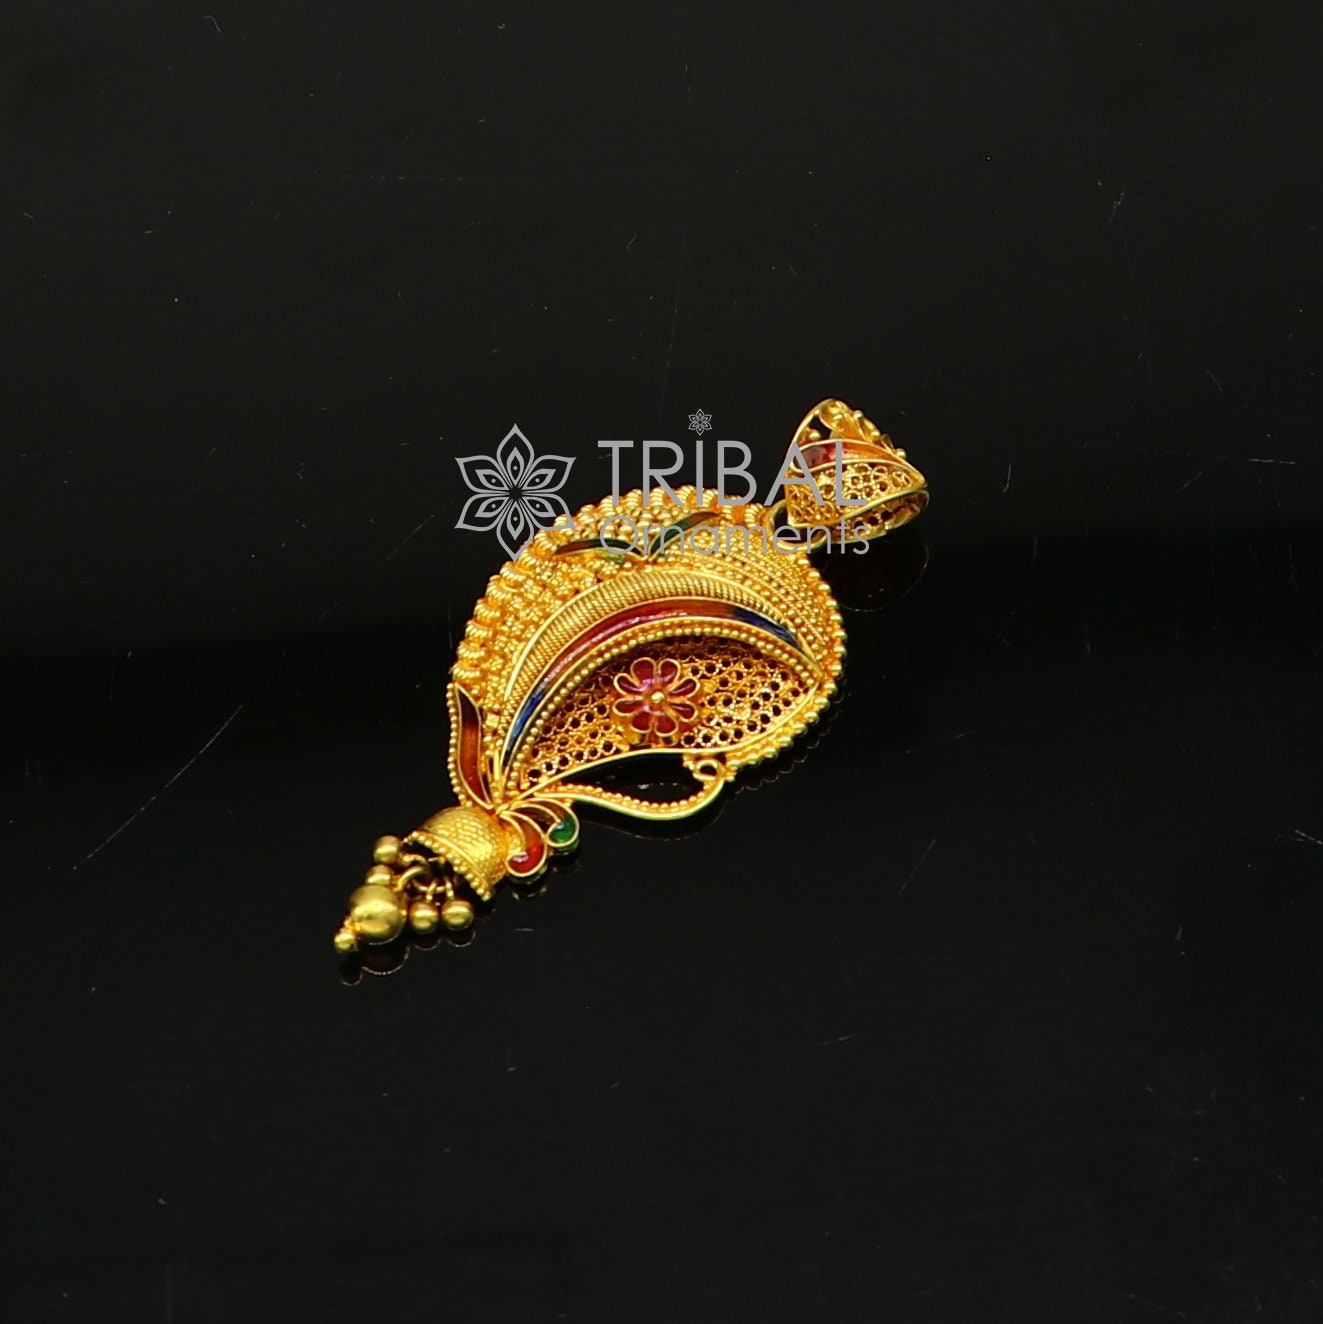 Handcrafted Traditional cultural filigree work trendy 22kt yellow gold unique functional pendant, amazing ethnic brides pendant jewelry gp24 - TRIBAL ORNAMENTS